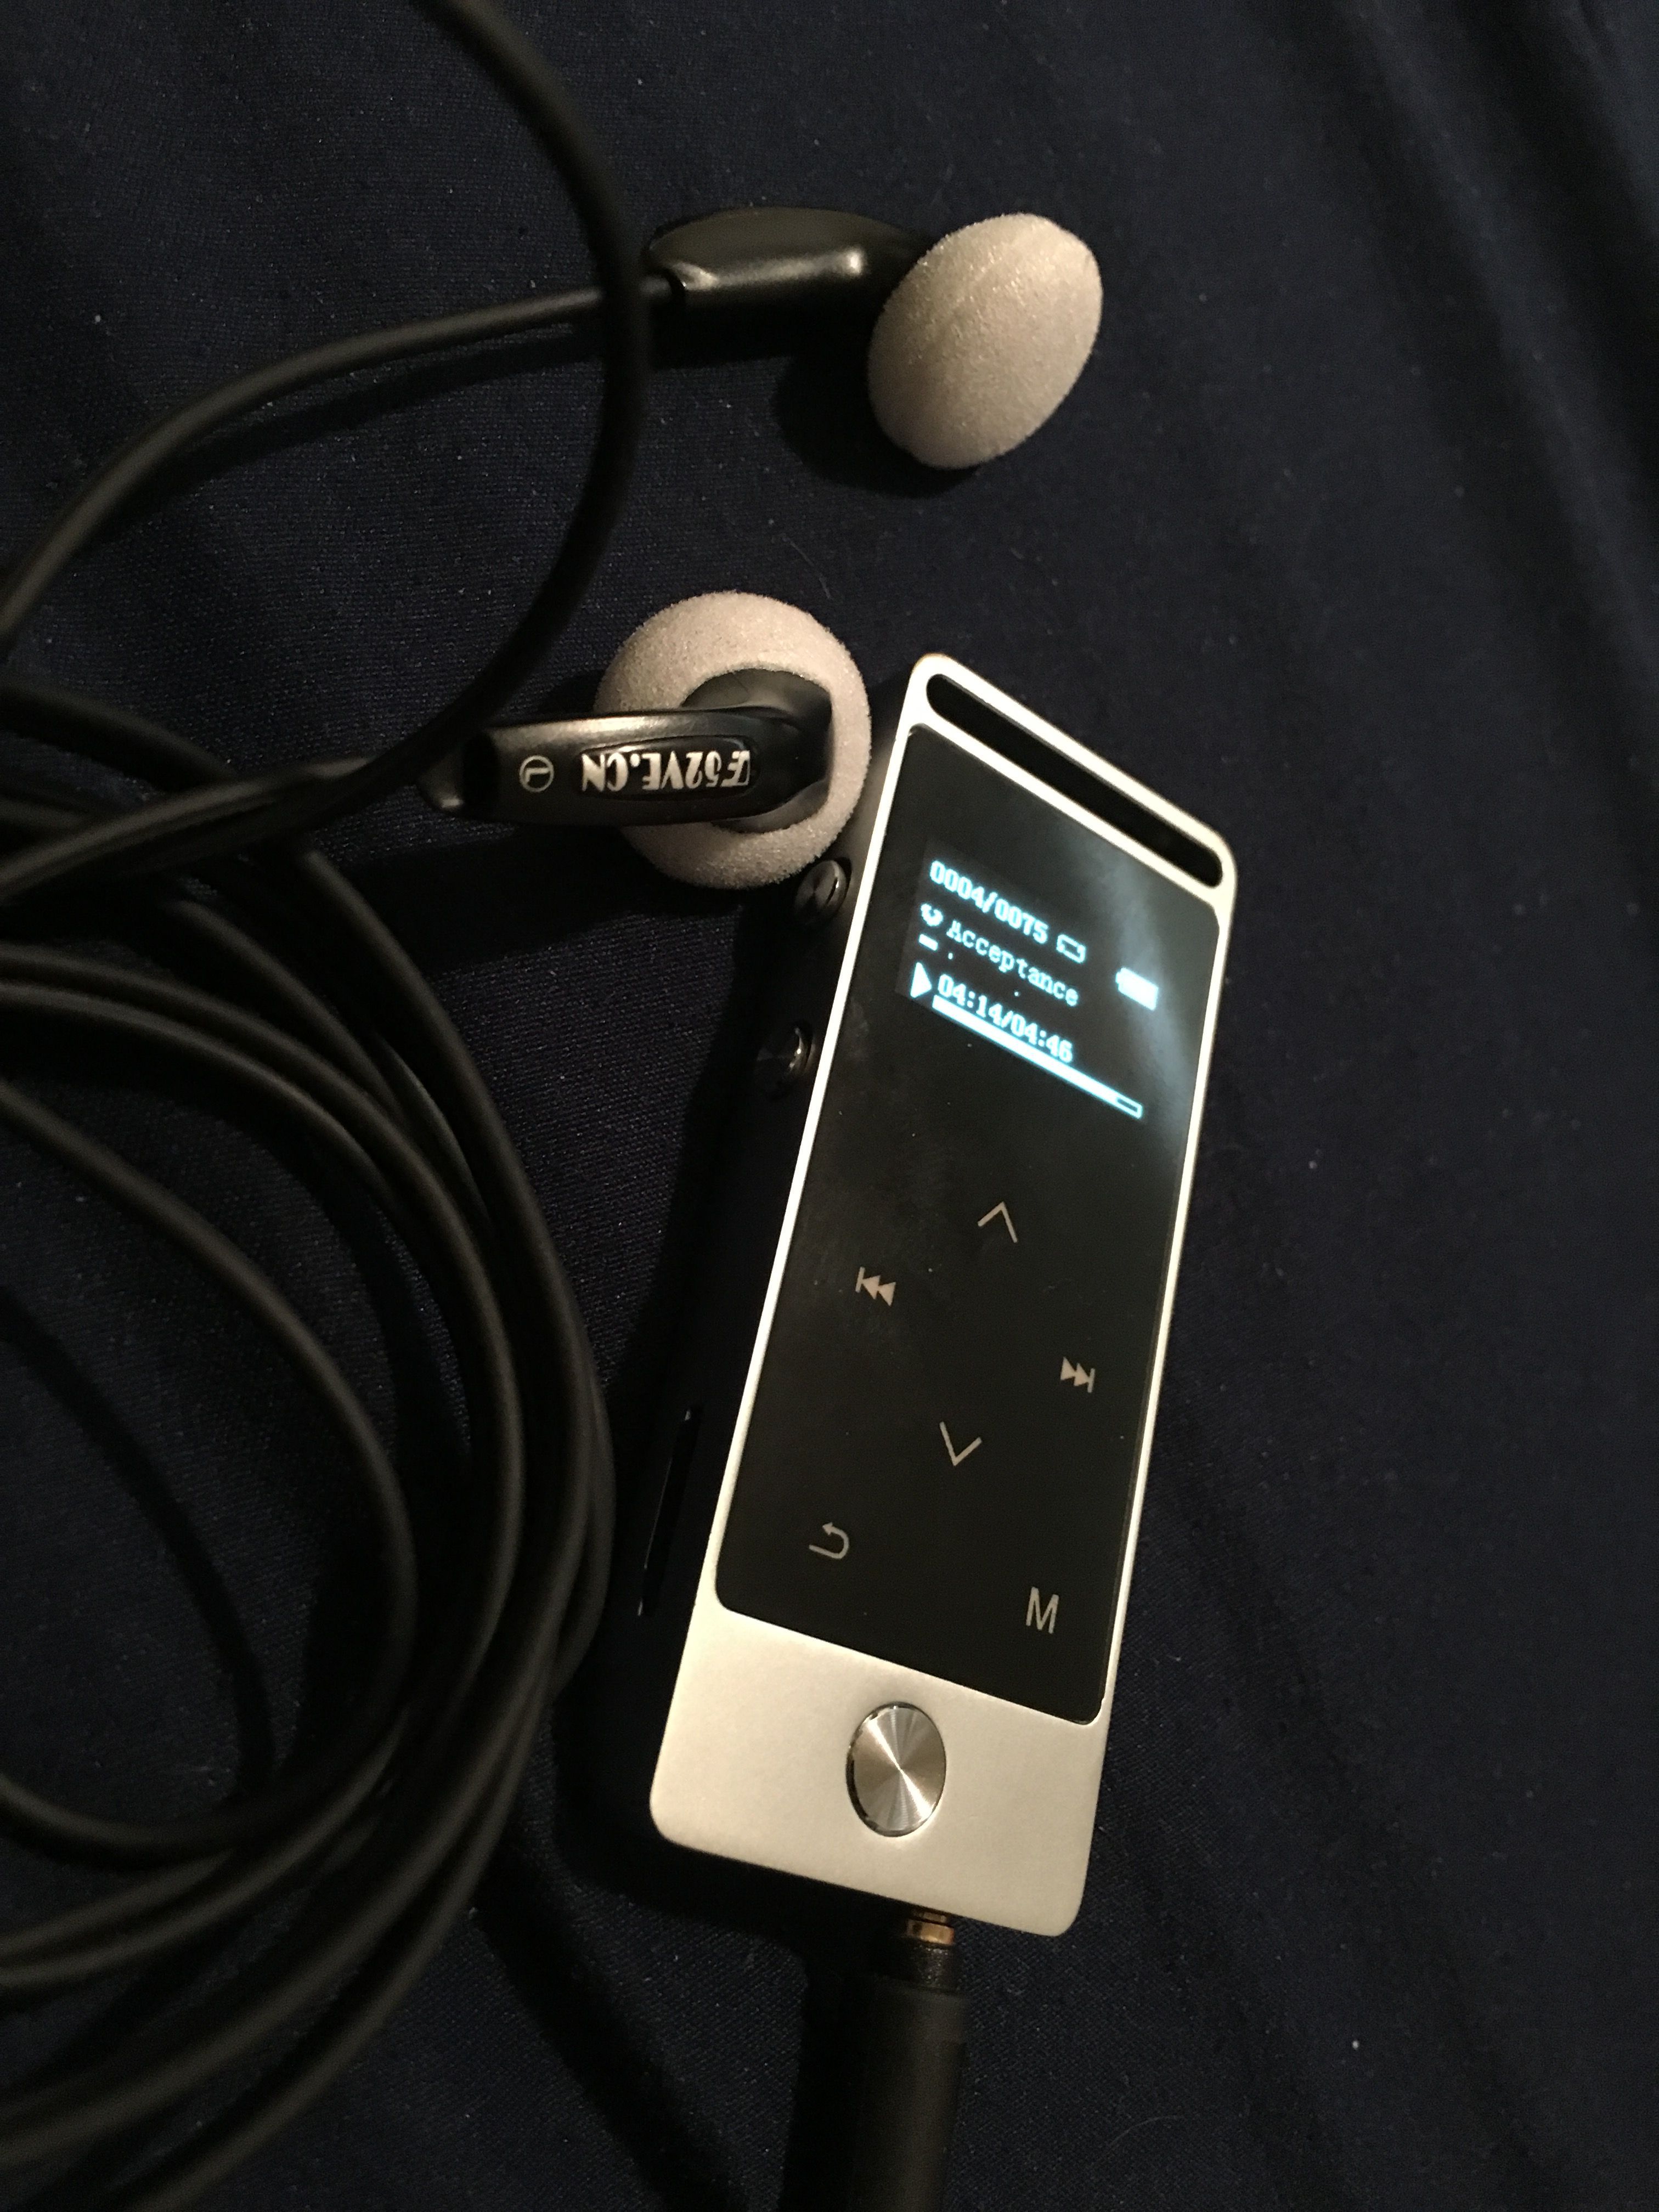 BENJIE S5 Entry-level Lossless Music Player